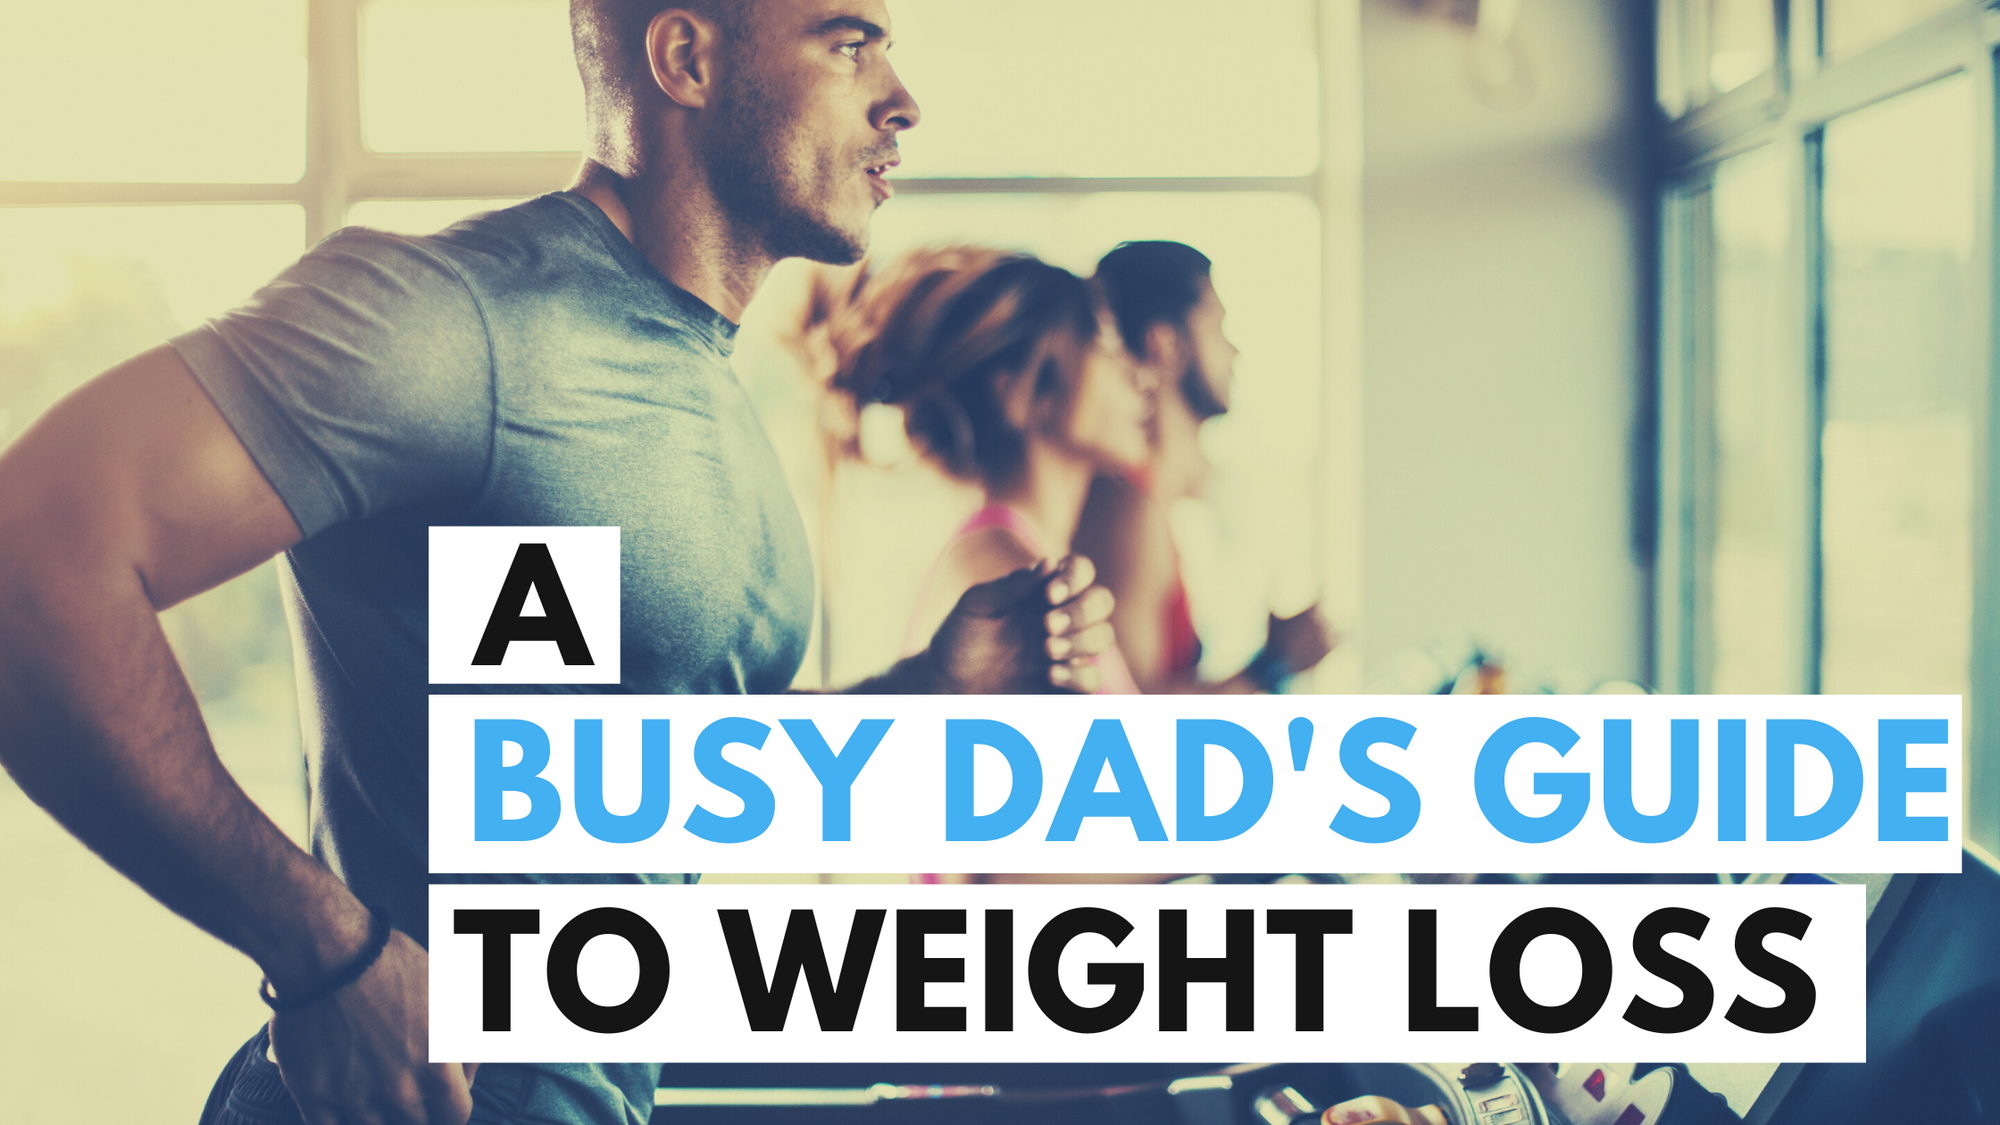 A Buys Dad's Guide to Weight Loss